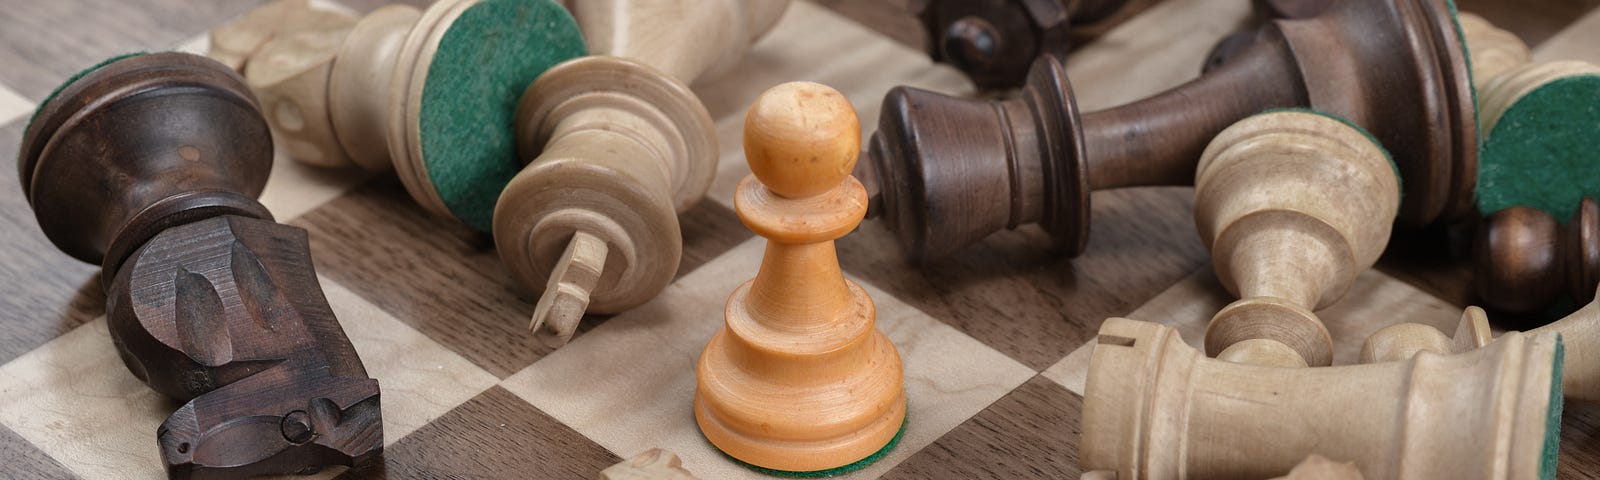 Compound Interest in Practice: Unlocking Layered Tactical Combinations in  Chess, by Ben Lazaroff